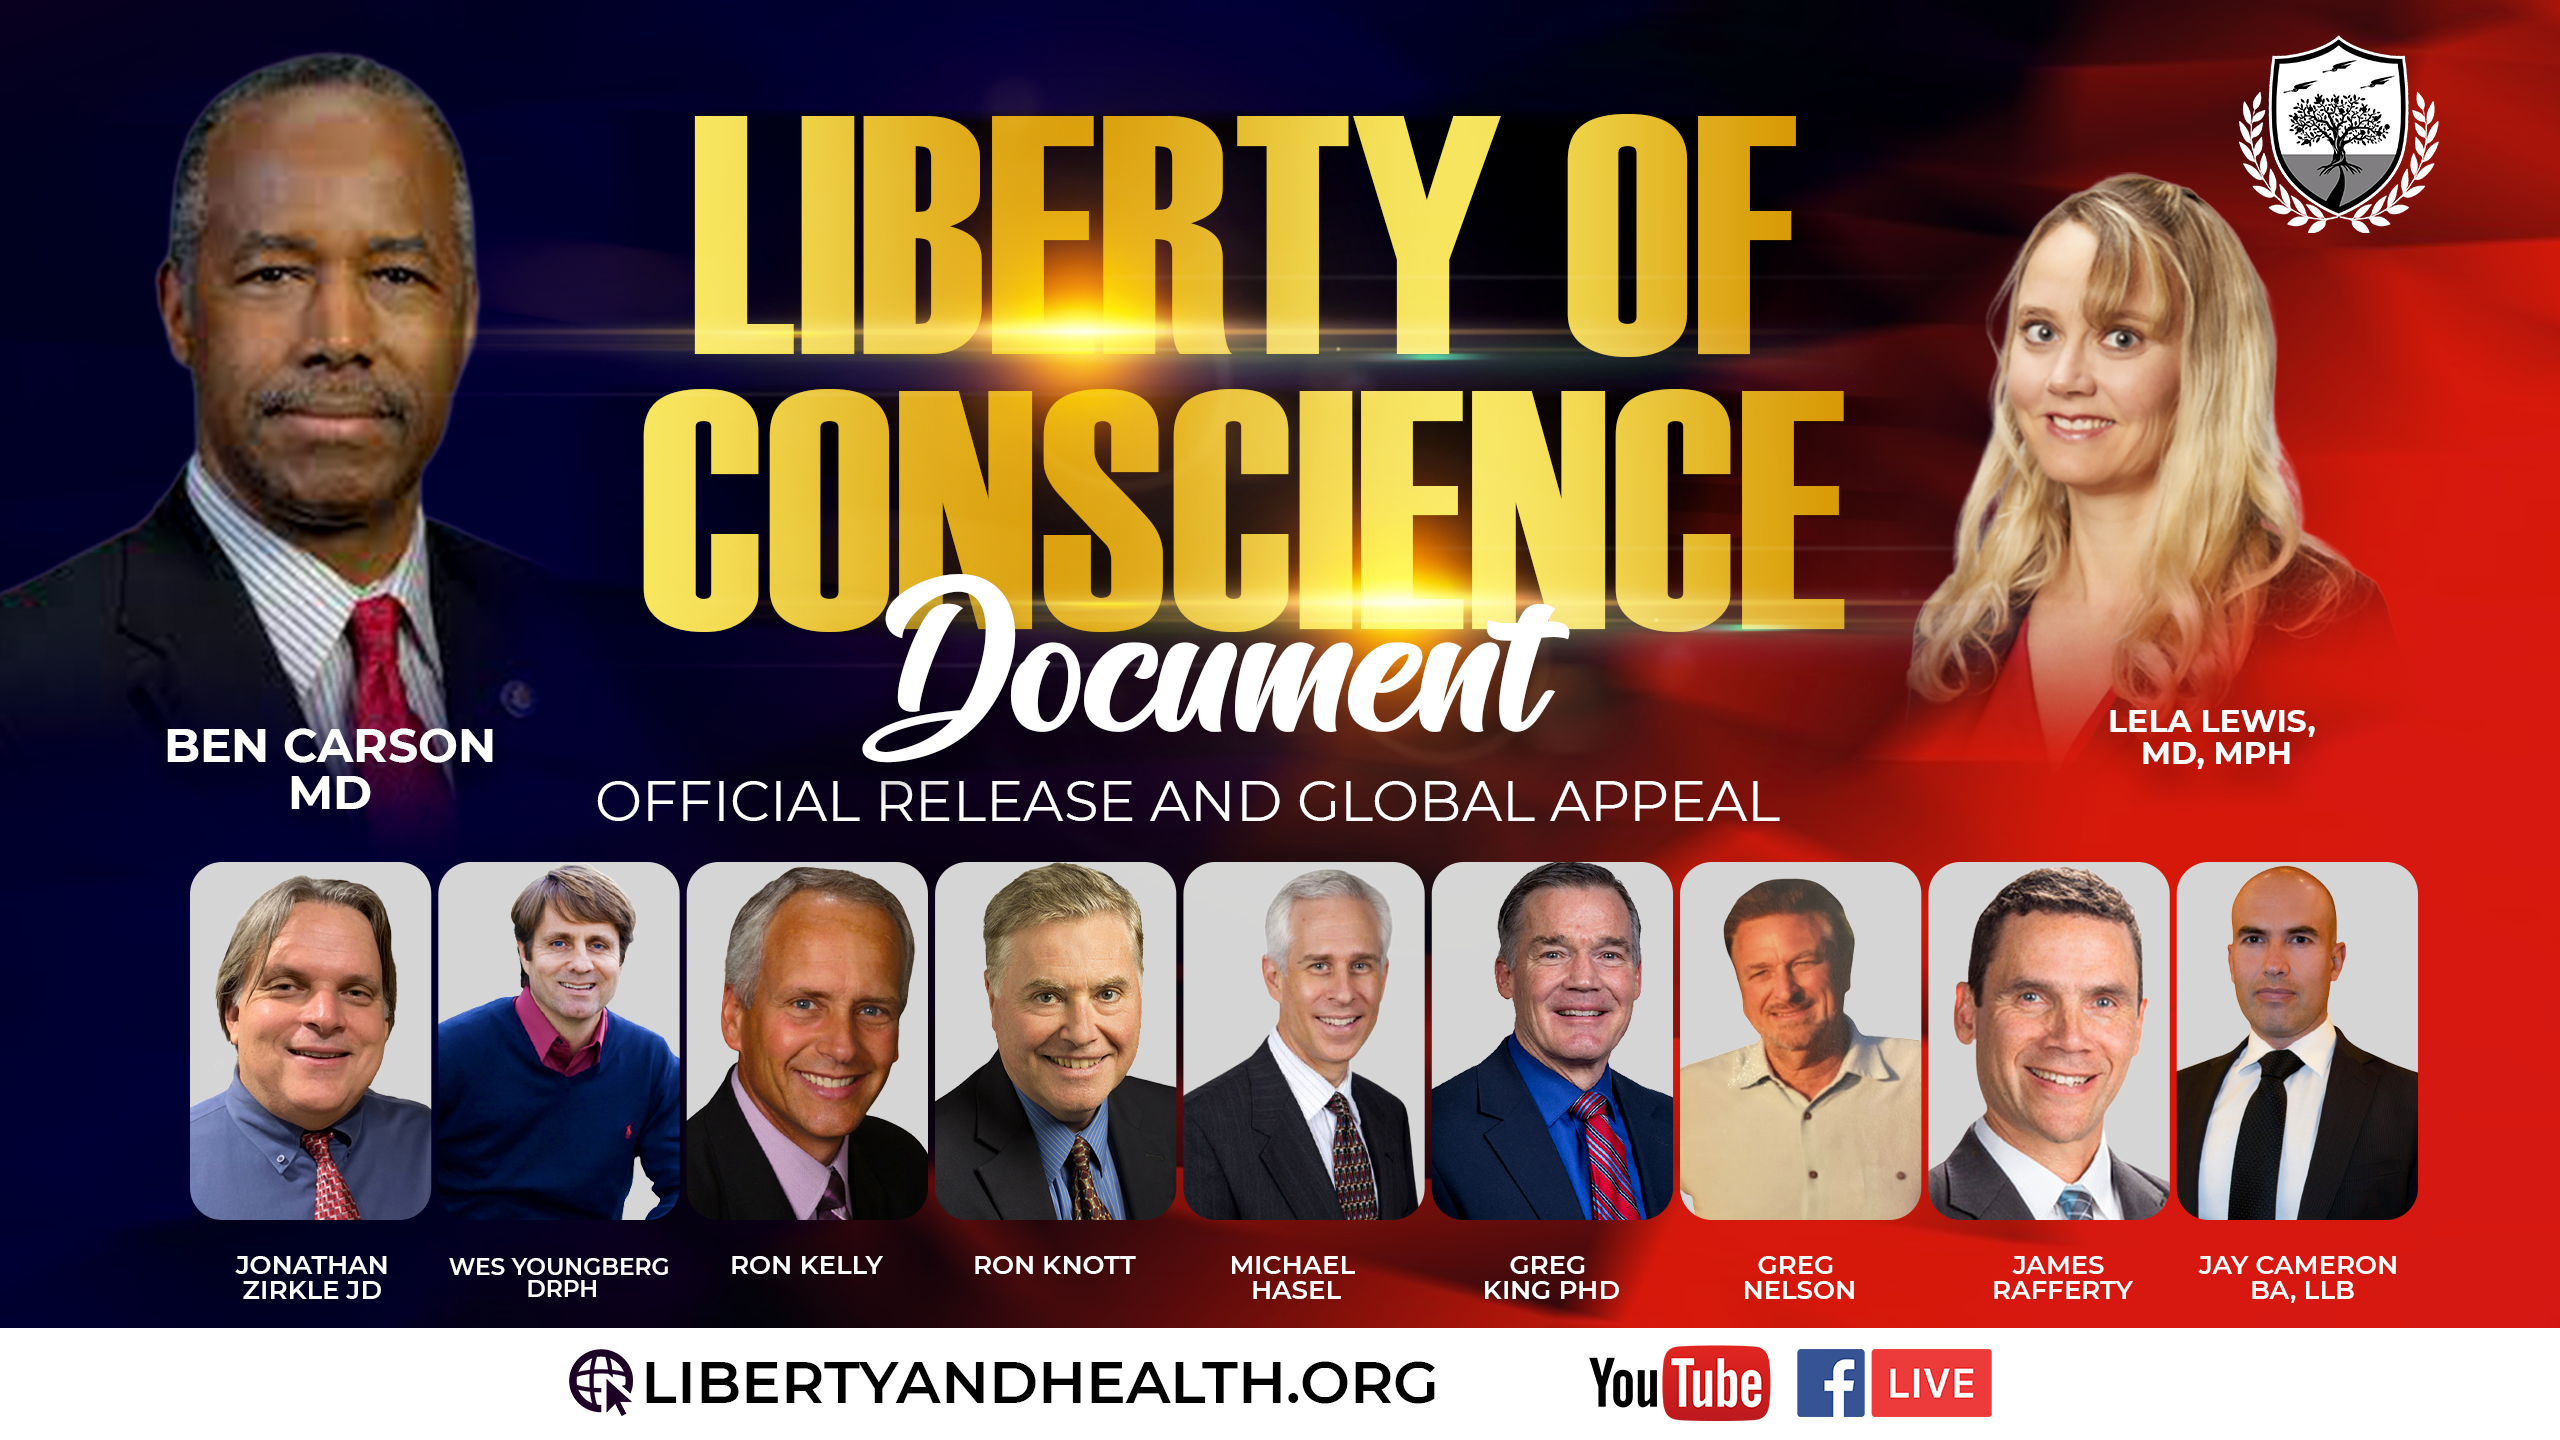 Liberty of Conscience Document with Ben Carson